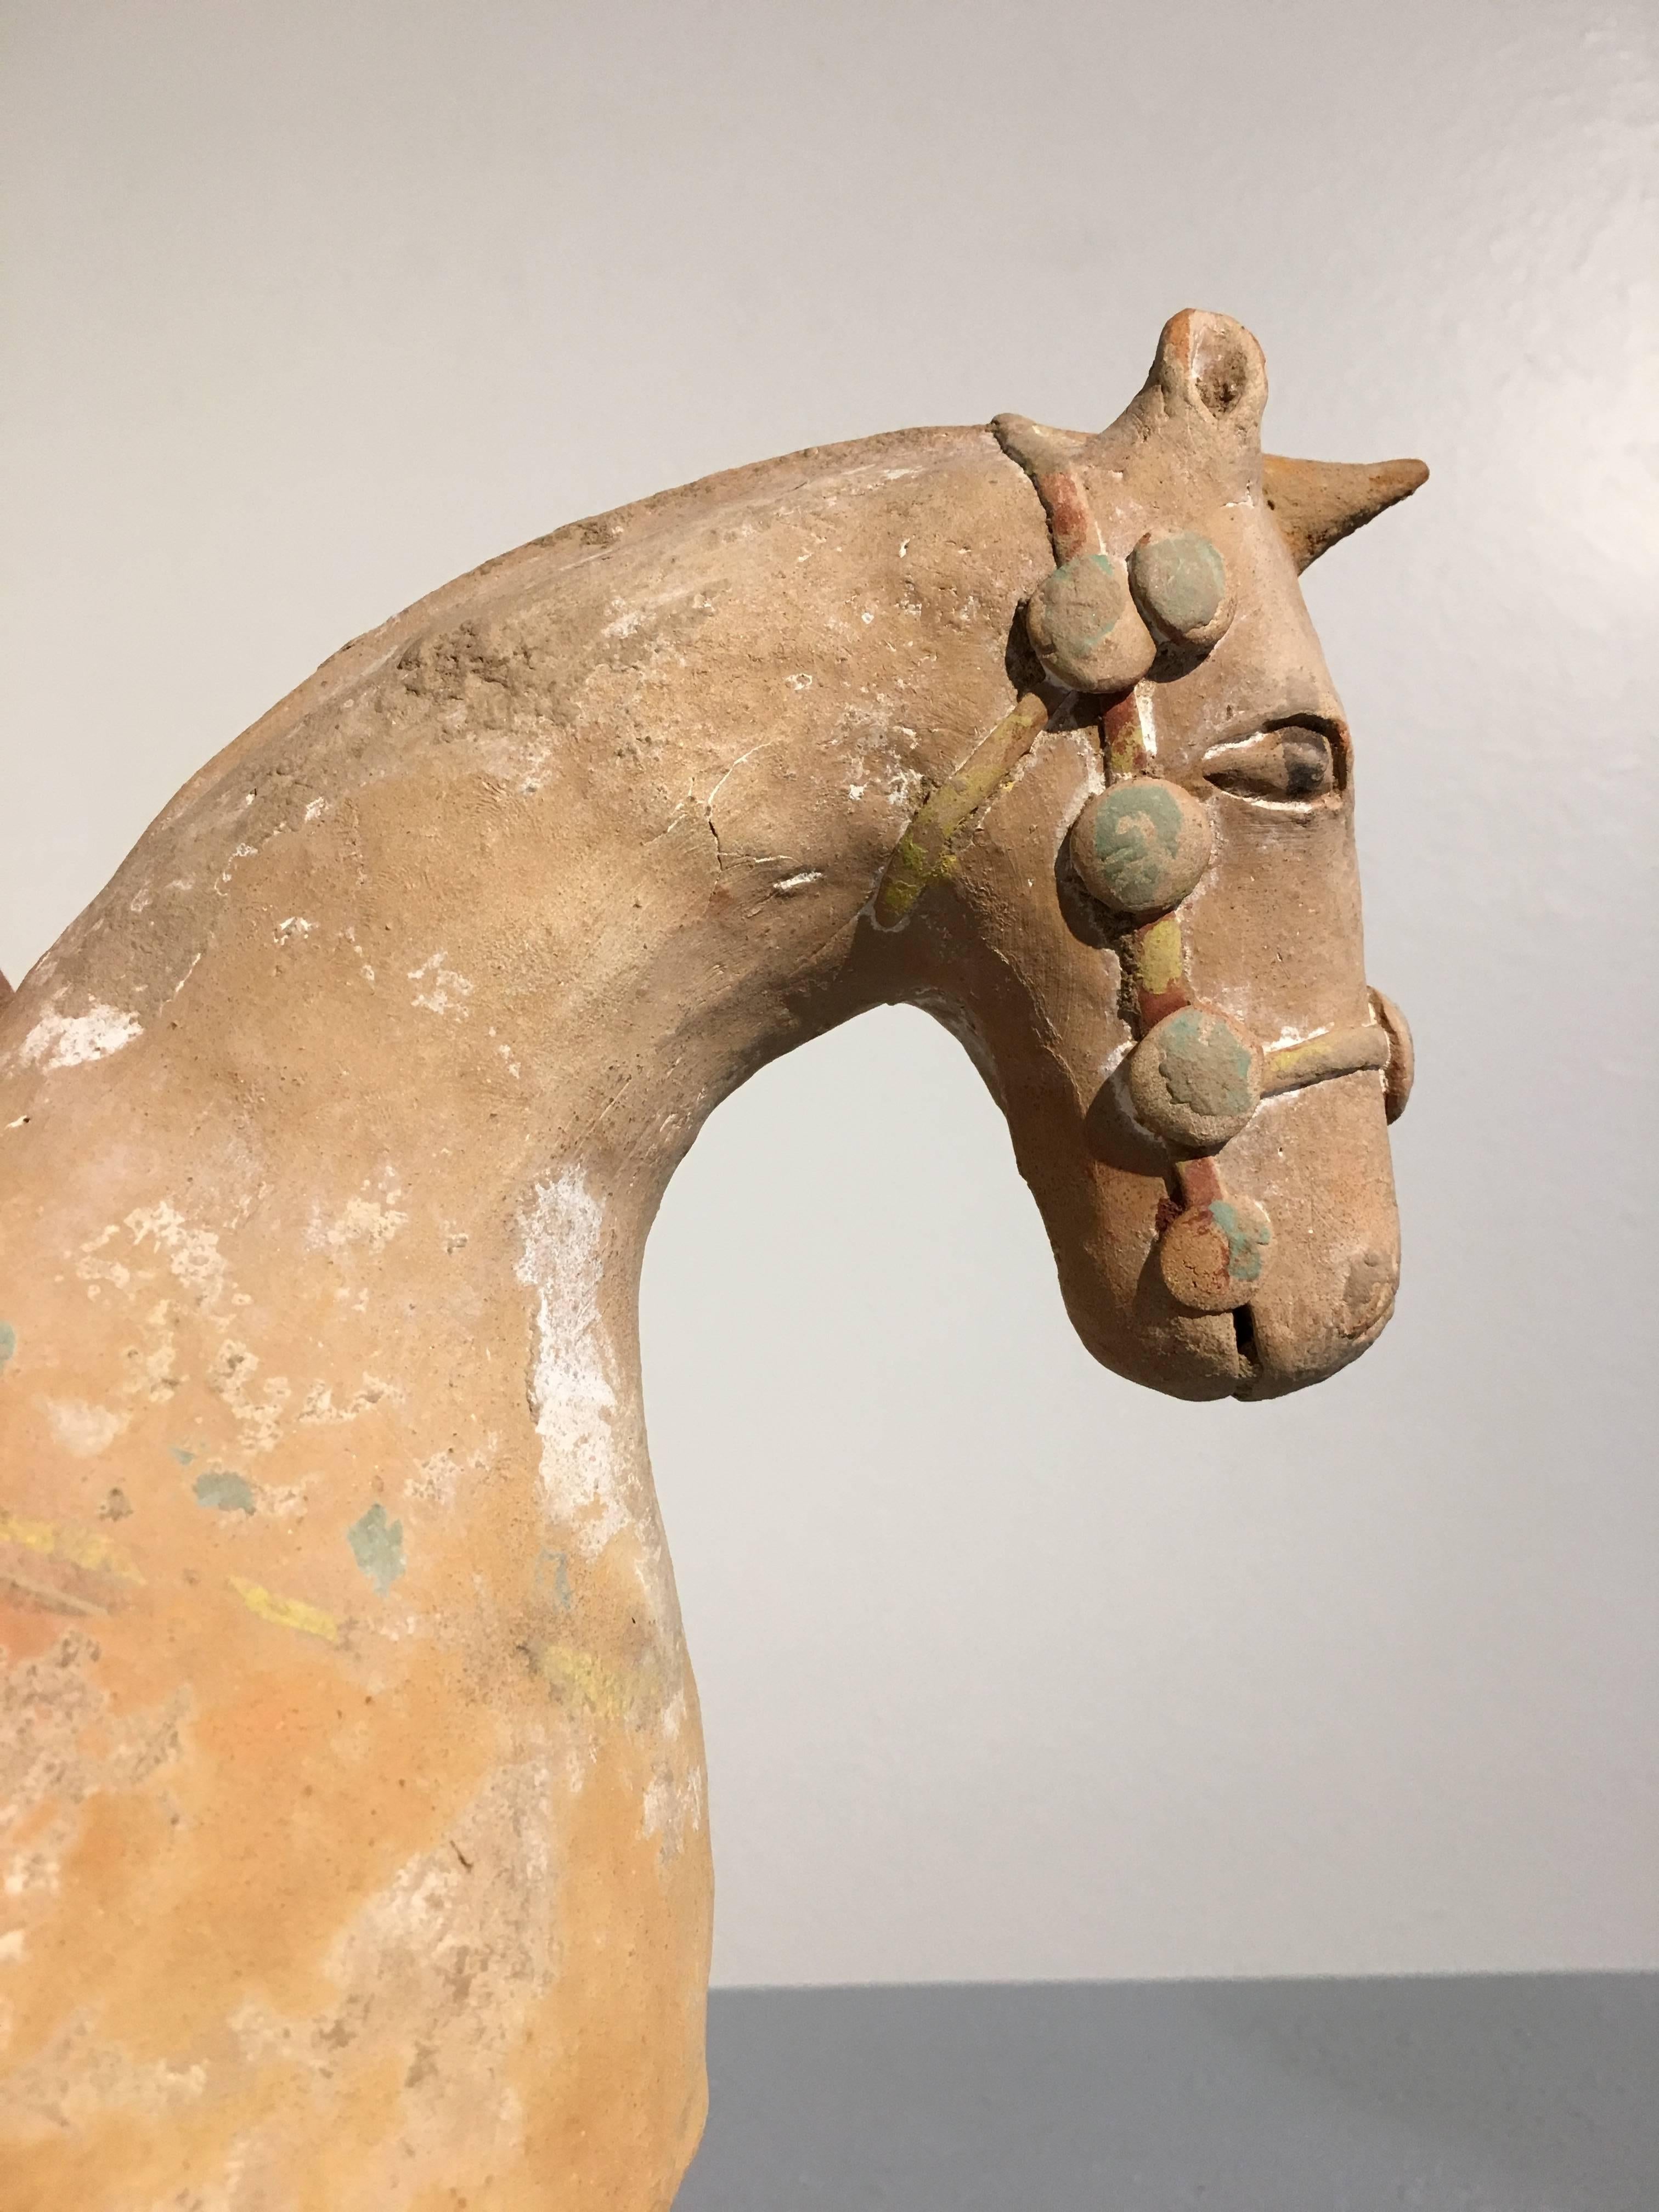 Fired Chinese Six Dynasties Pottery Model of an Armored Horse, 3rd-4th Century, China For Sale